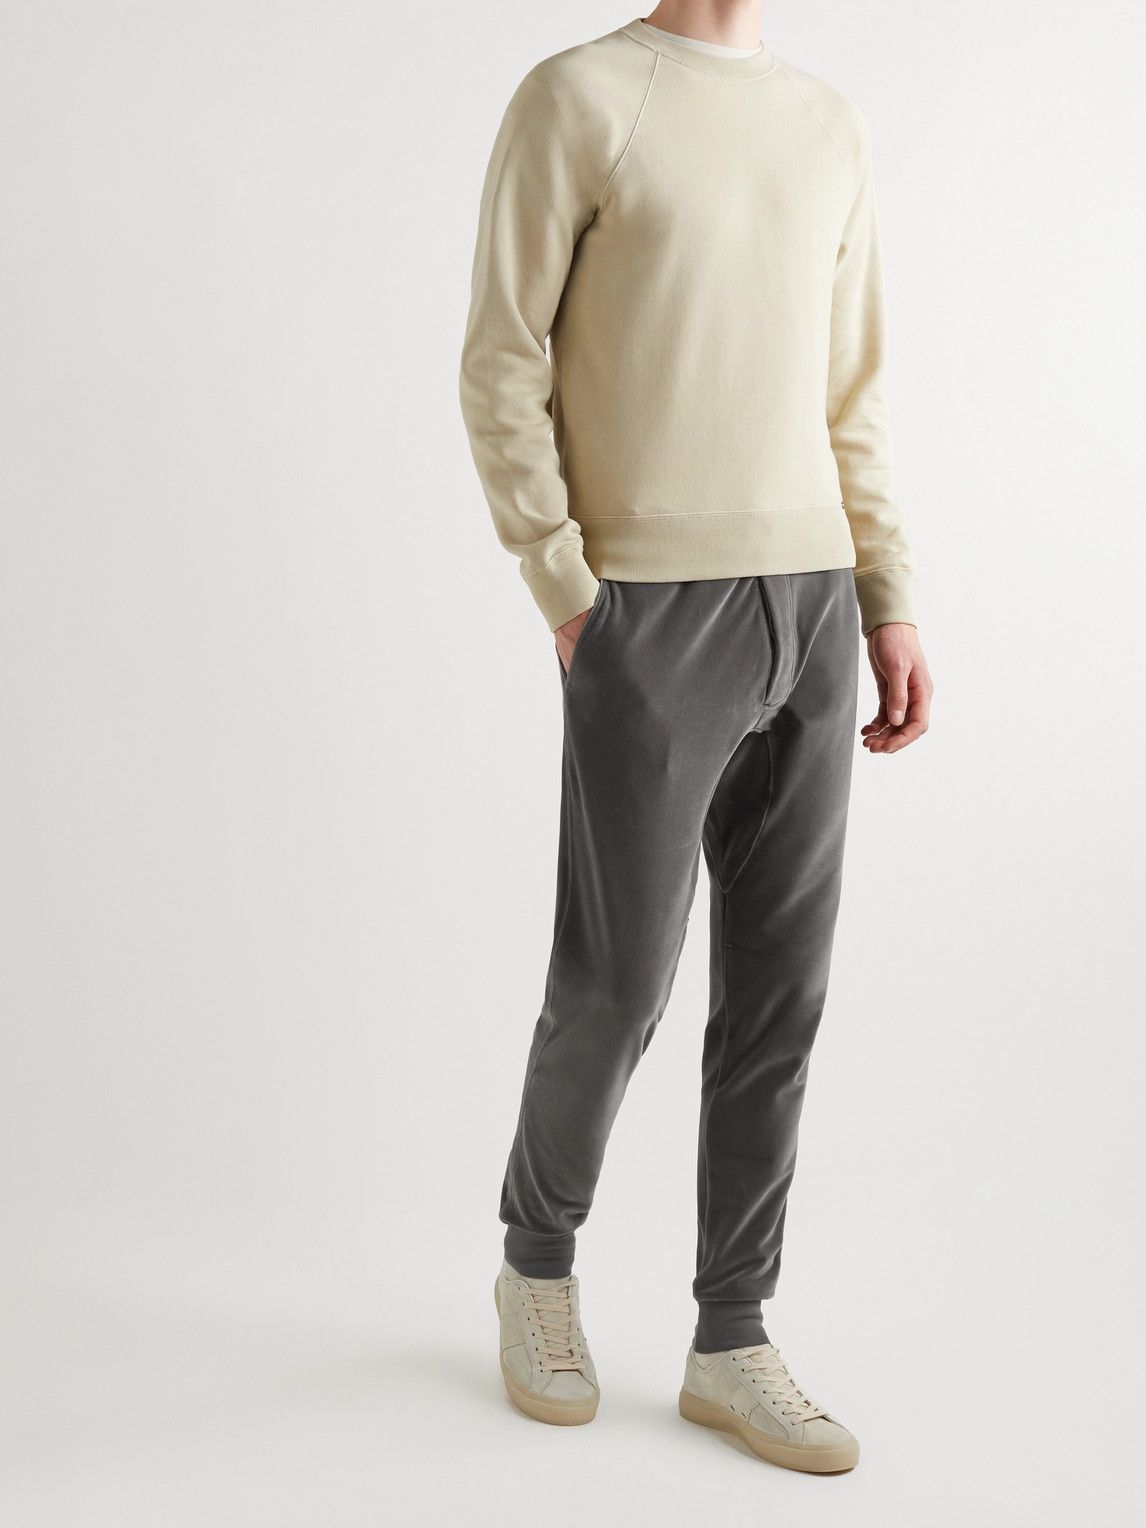 TOM FORD - Tapered Cotton-Blend Velour Sweatpants - Gray TOM FORD